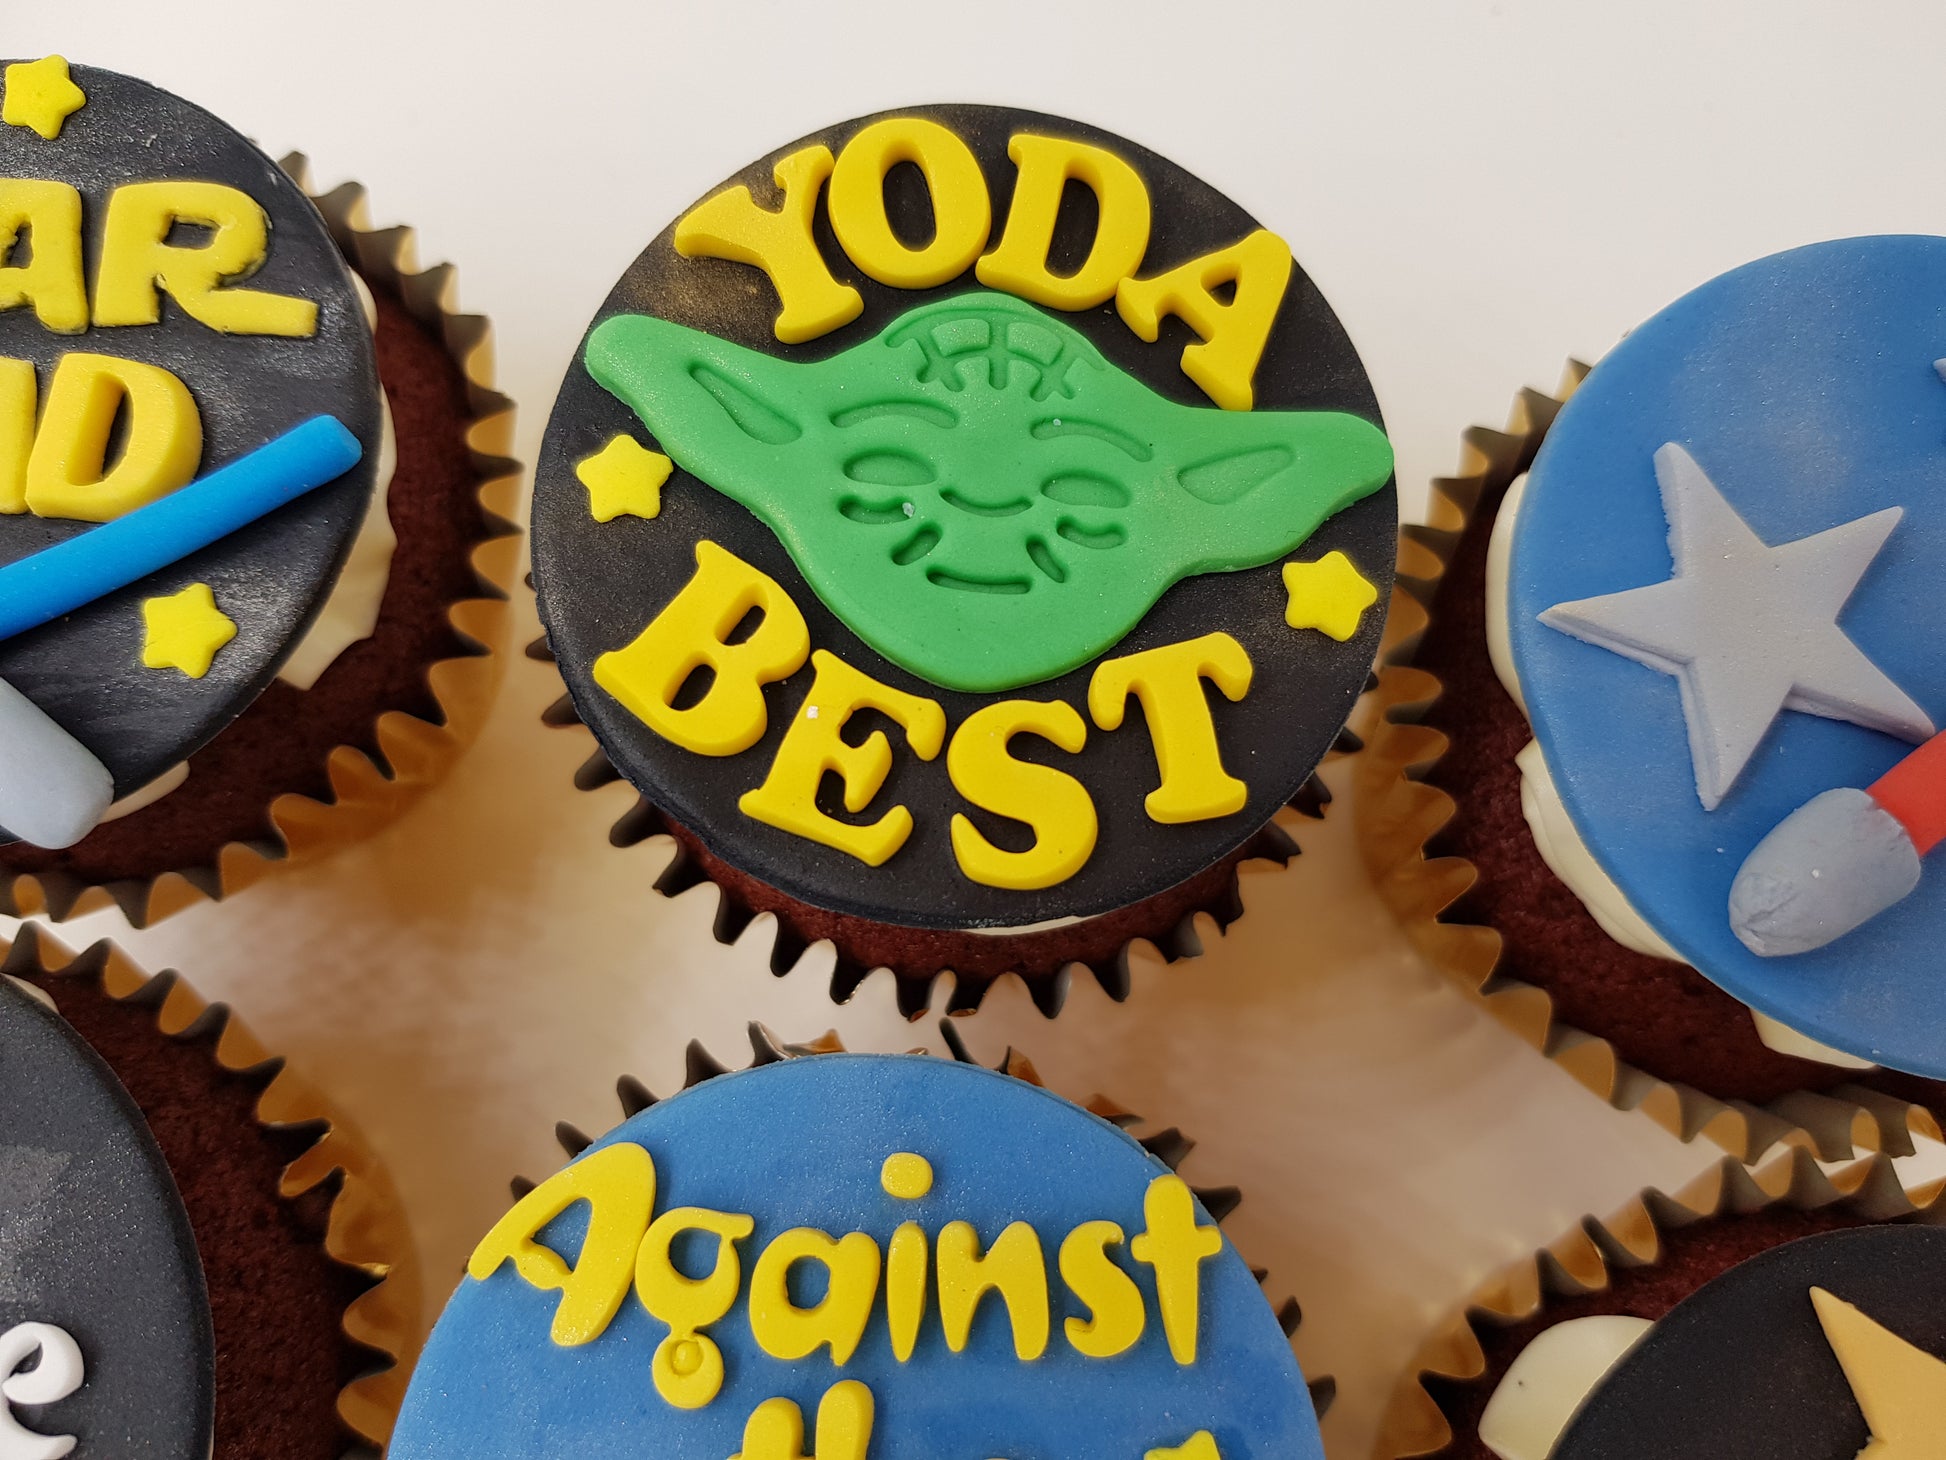 Father's Day Cupcake Set - Dad, Yoda-Best - Cuppacakes - Singapore's Very Own Cupcakes Shop